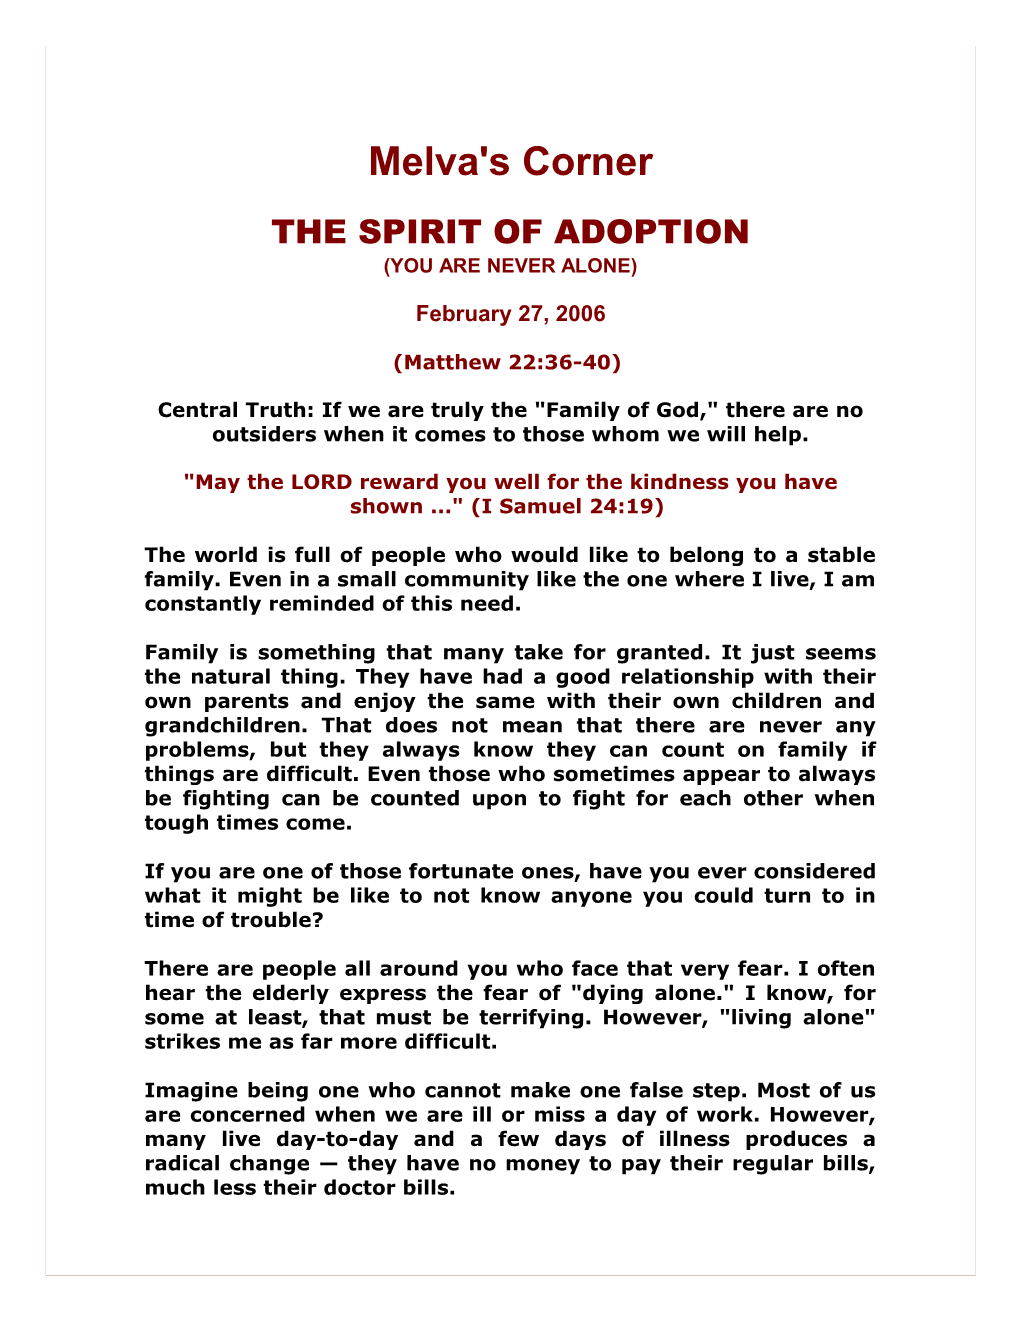 The Spirit of Adoption (You Are Never Alone)